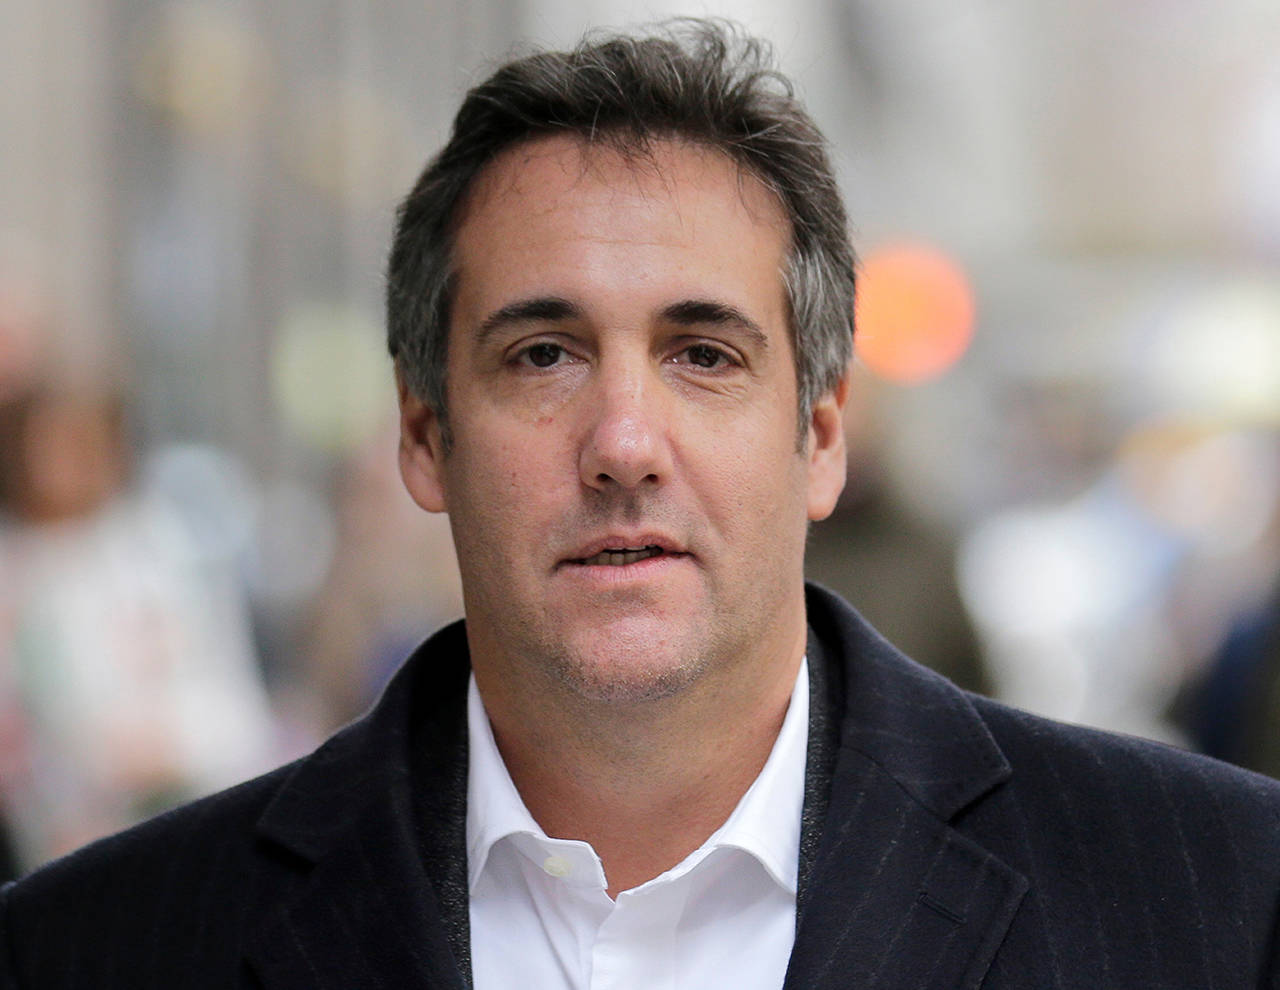 In this April 2018 photo, Michael Cohen, President Donald Trump’s former attorney, walks along a sidewalk in New York. Cohen will testify publicly before Congress in February. (AP Photo/Seth Wenig, File)